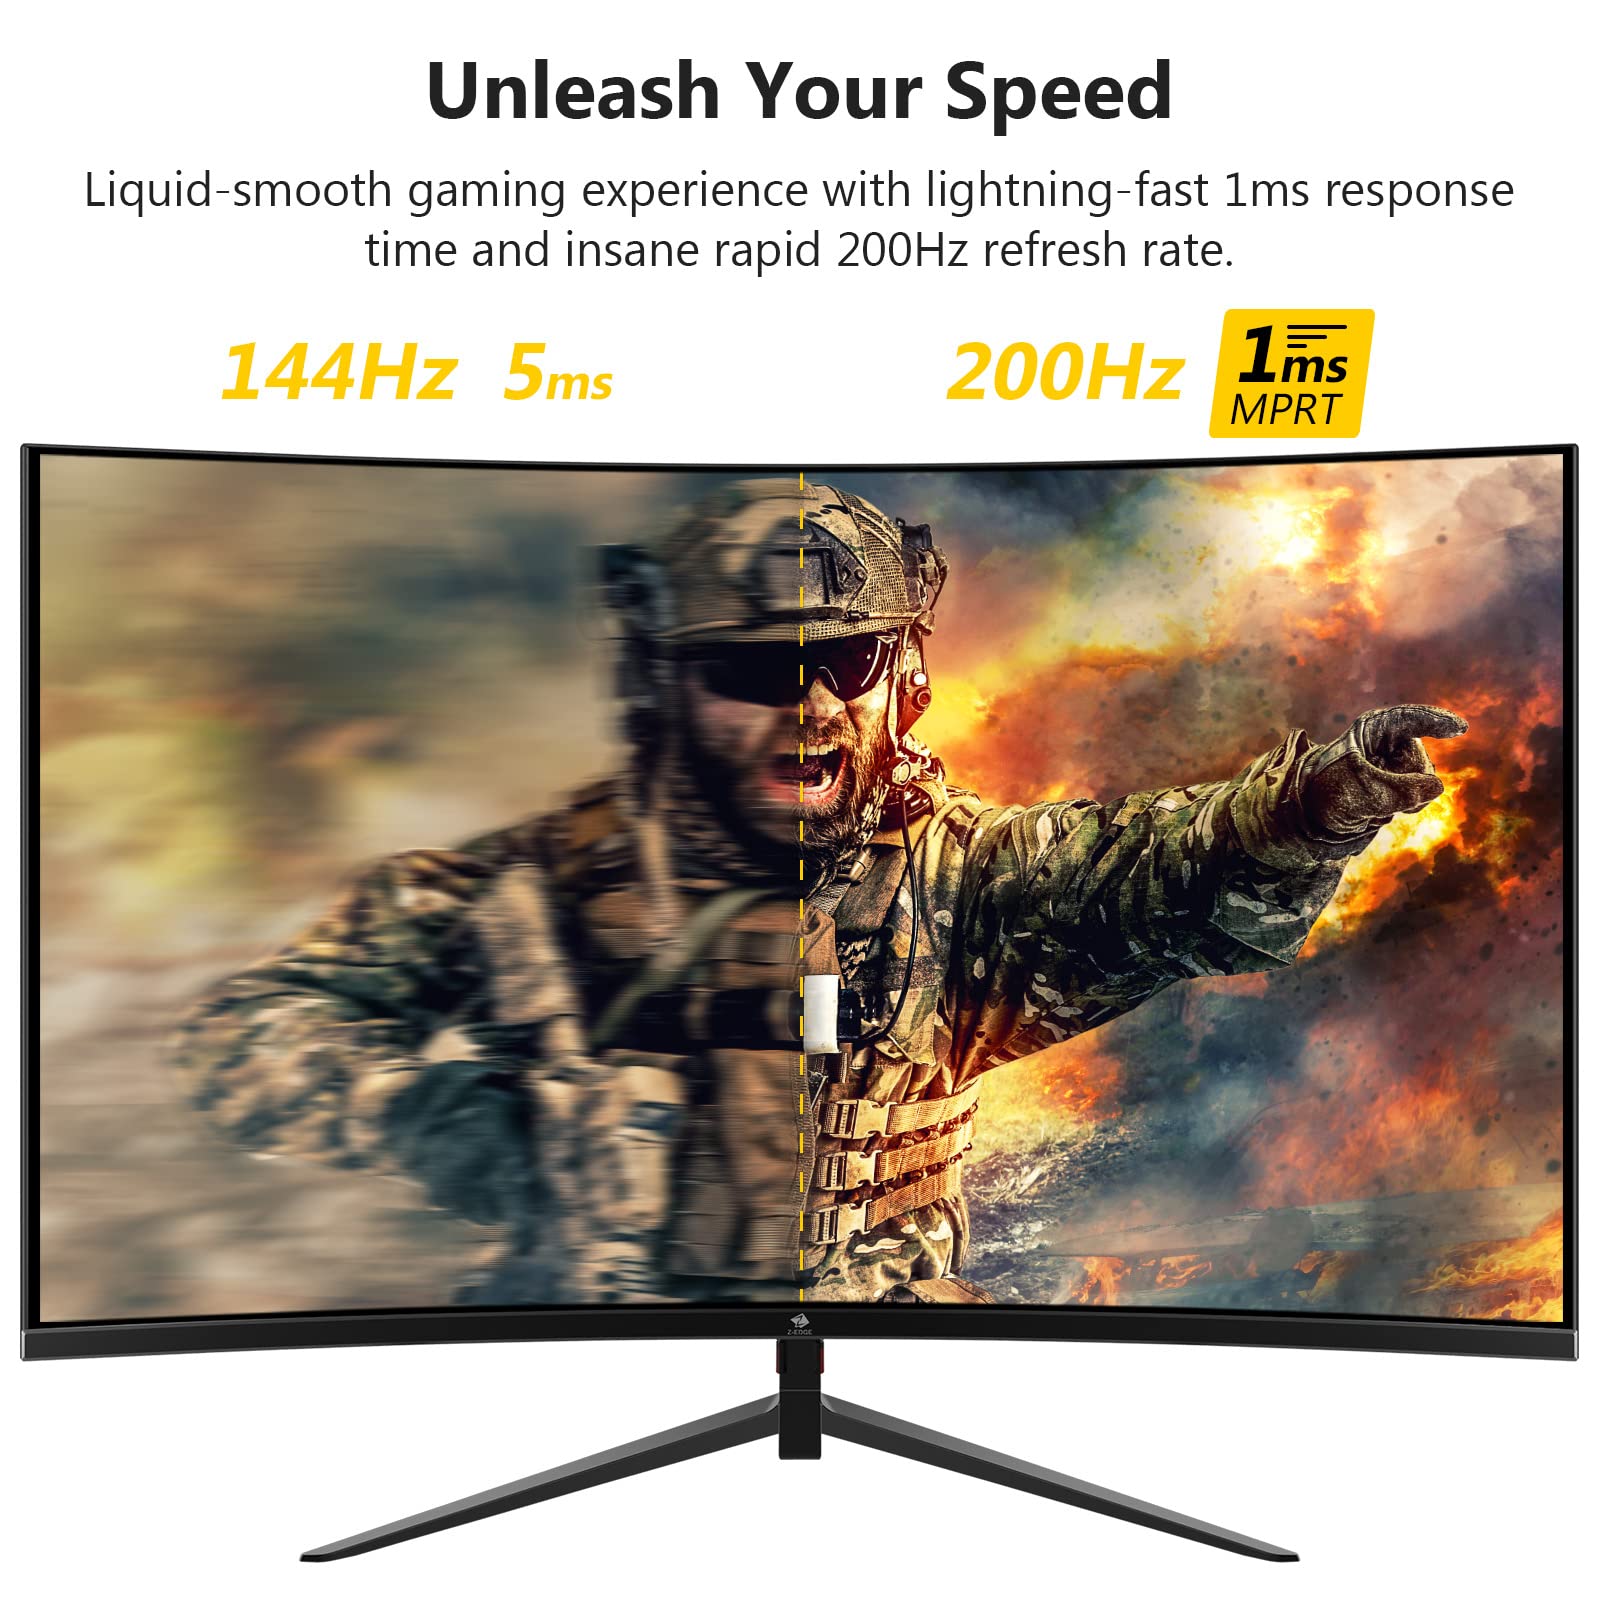 Z-Edge UG27 27-inch Curved Gaming Monitor 16:9 1920x1080 200/144Hz 1ms Frameless LED Gaming Monitor, AMD Freesync Premium Display Port HDMI Built-in Speakers